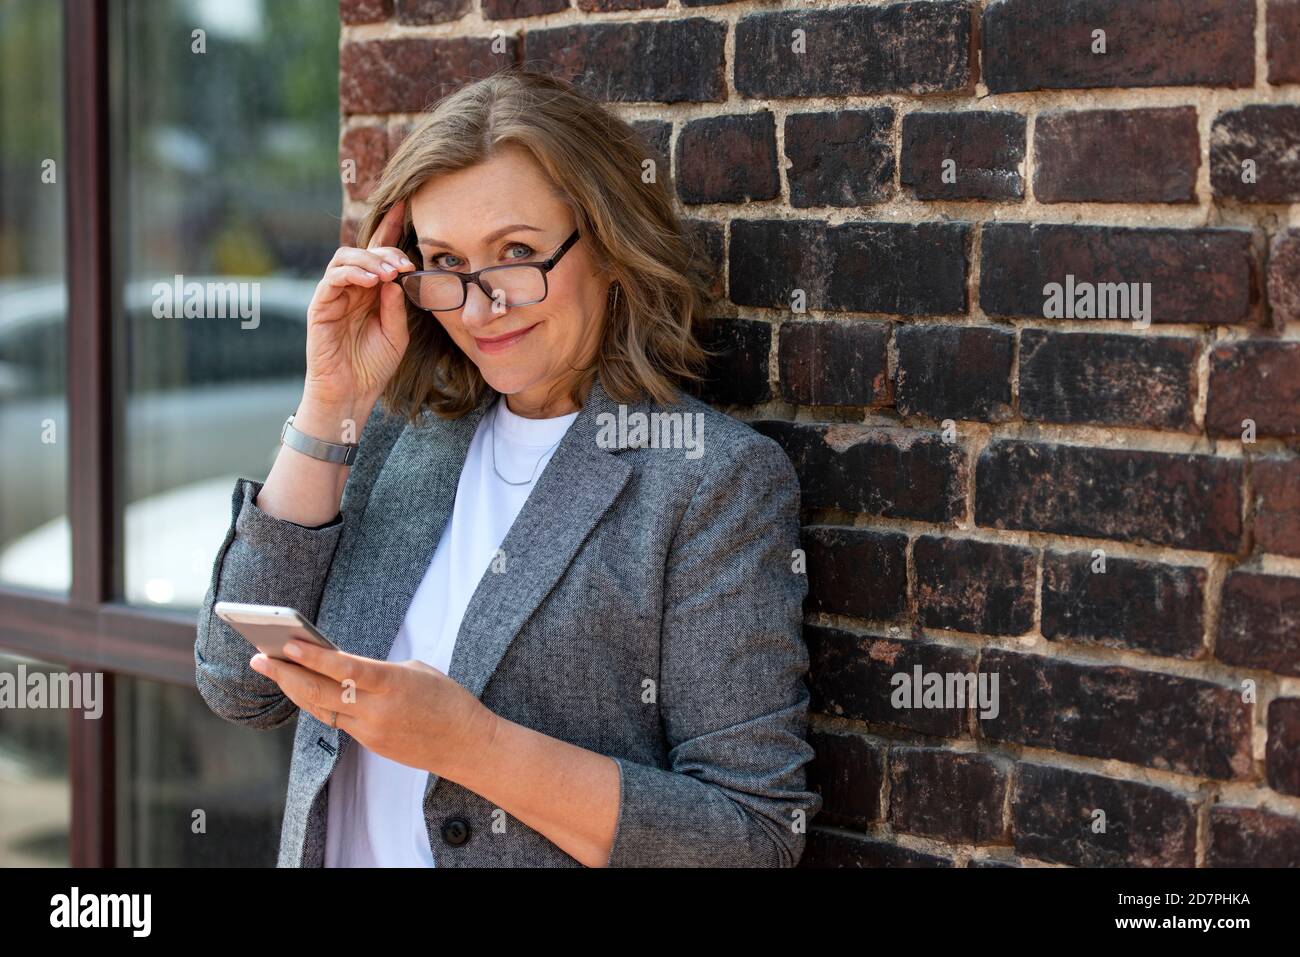 Portrait of a happy beautiful blonde woman, 55 years old, smiling, with a smartphone in hand. Outdoors, in the city. Stock Photo